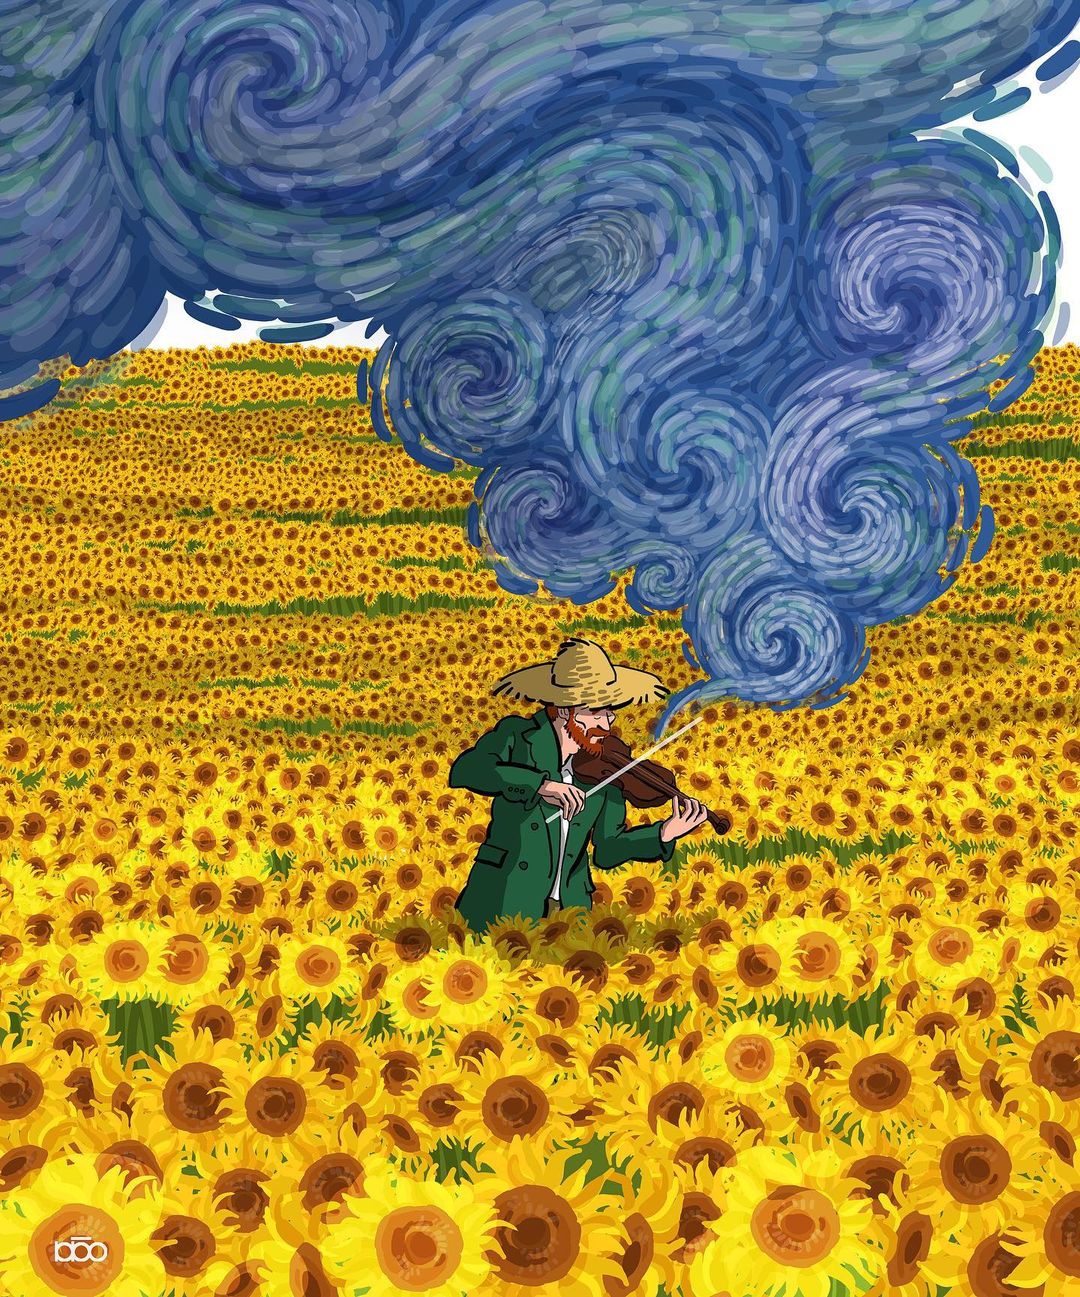 Vincent Van Goghs Life Recreated In His Own Art Style By Alireza Karimi Moghaddam 5